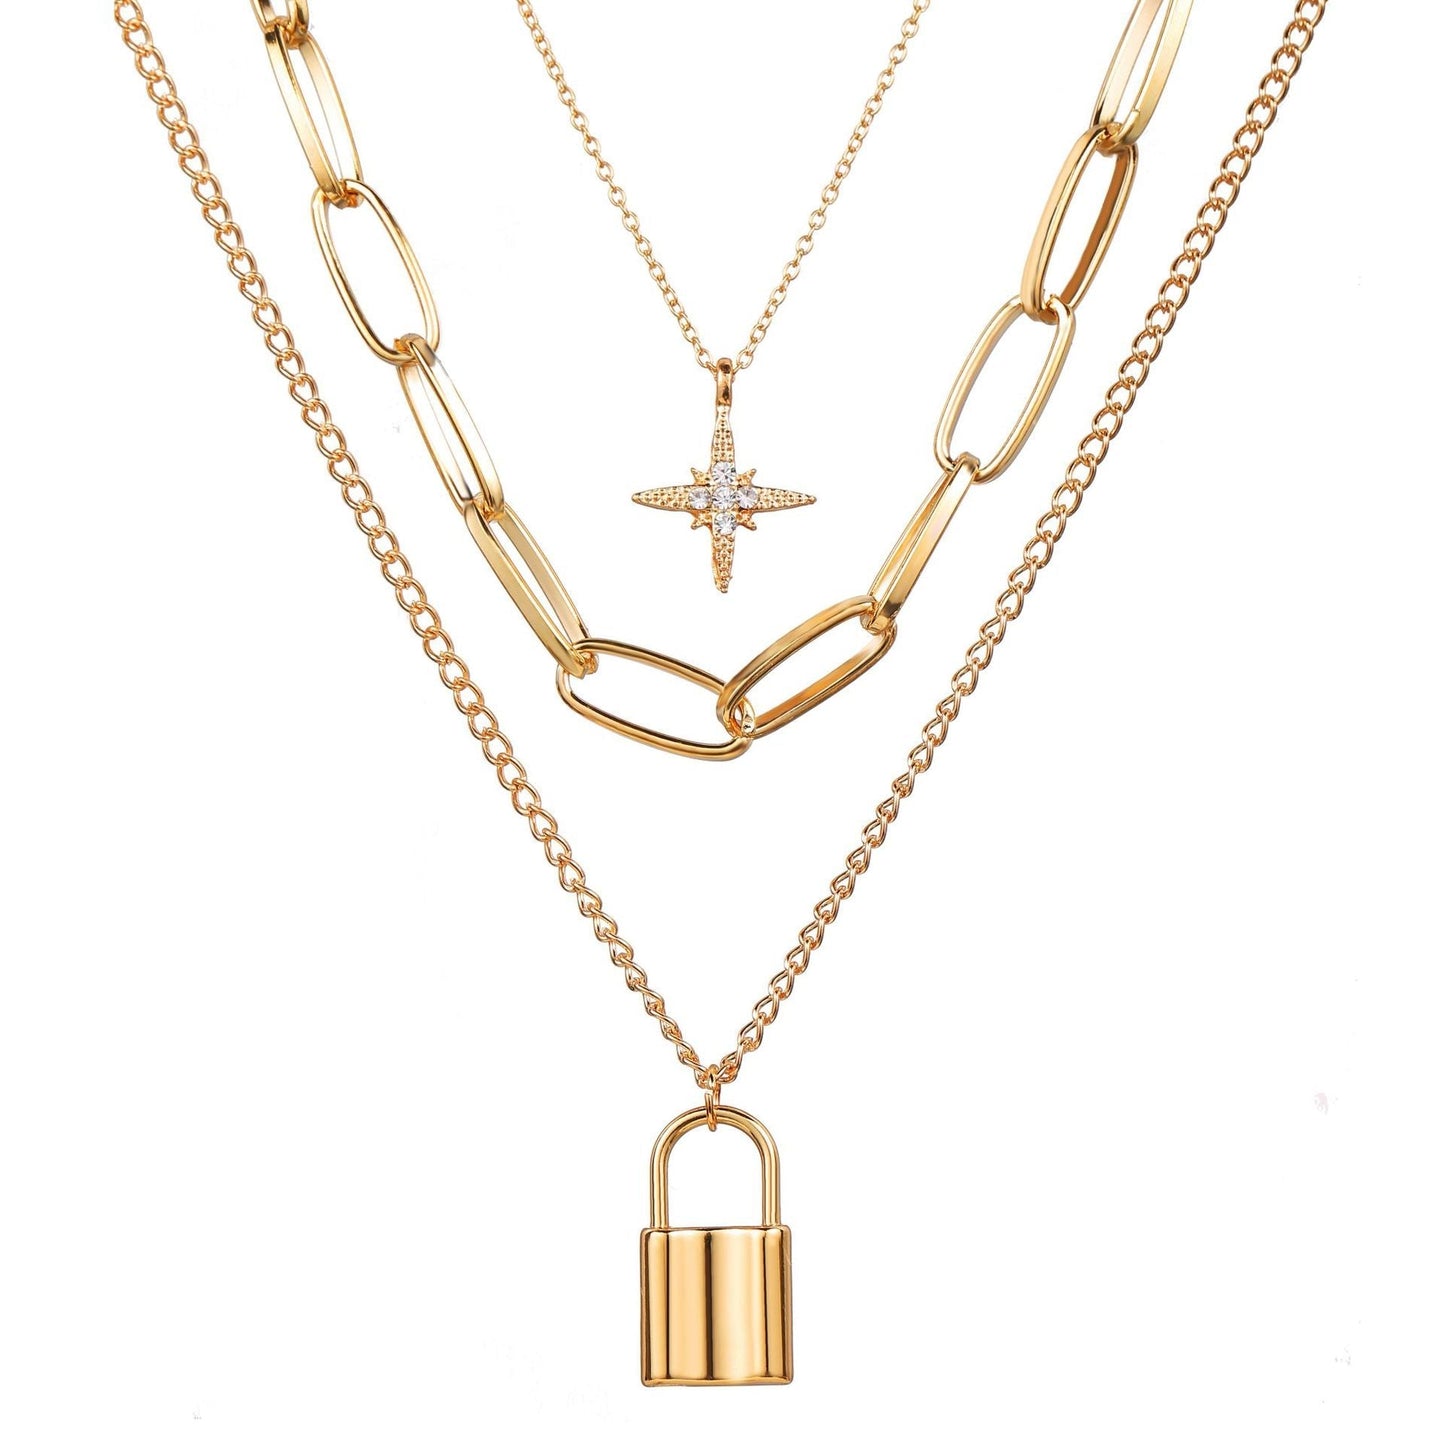 The Locked-In-A-Star Pendant Necklace